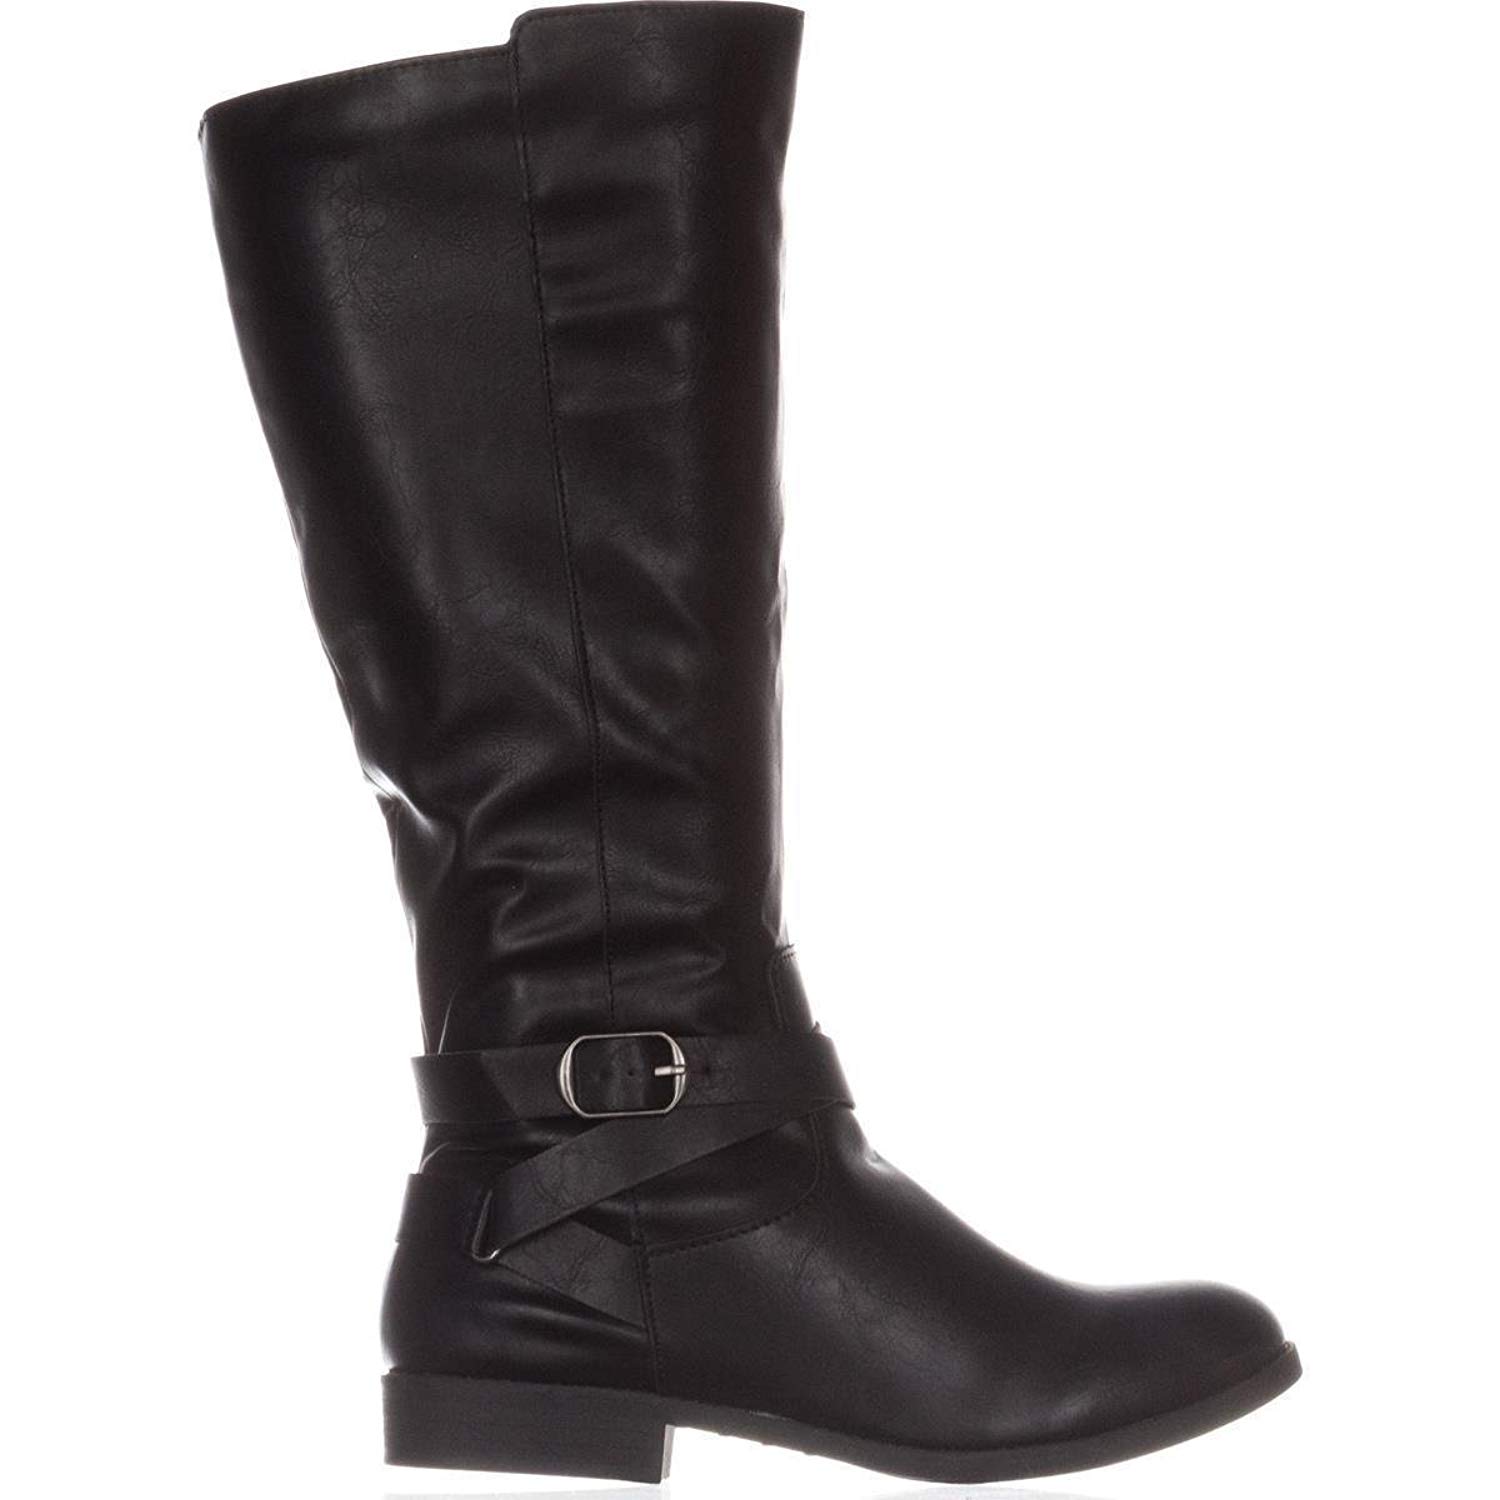 Style & Co. Womens madixe Almond Toe Knee High Fashion Boots, Black ...